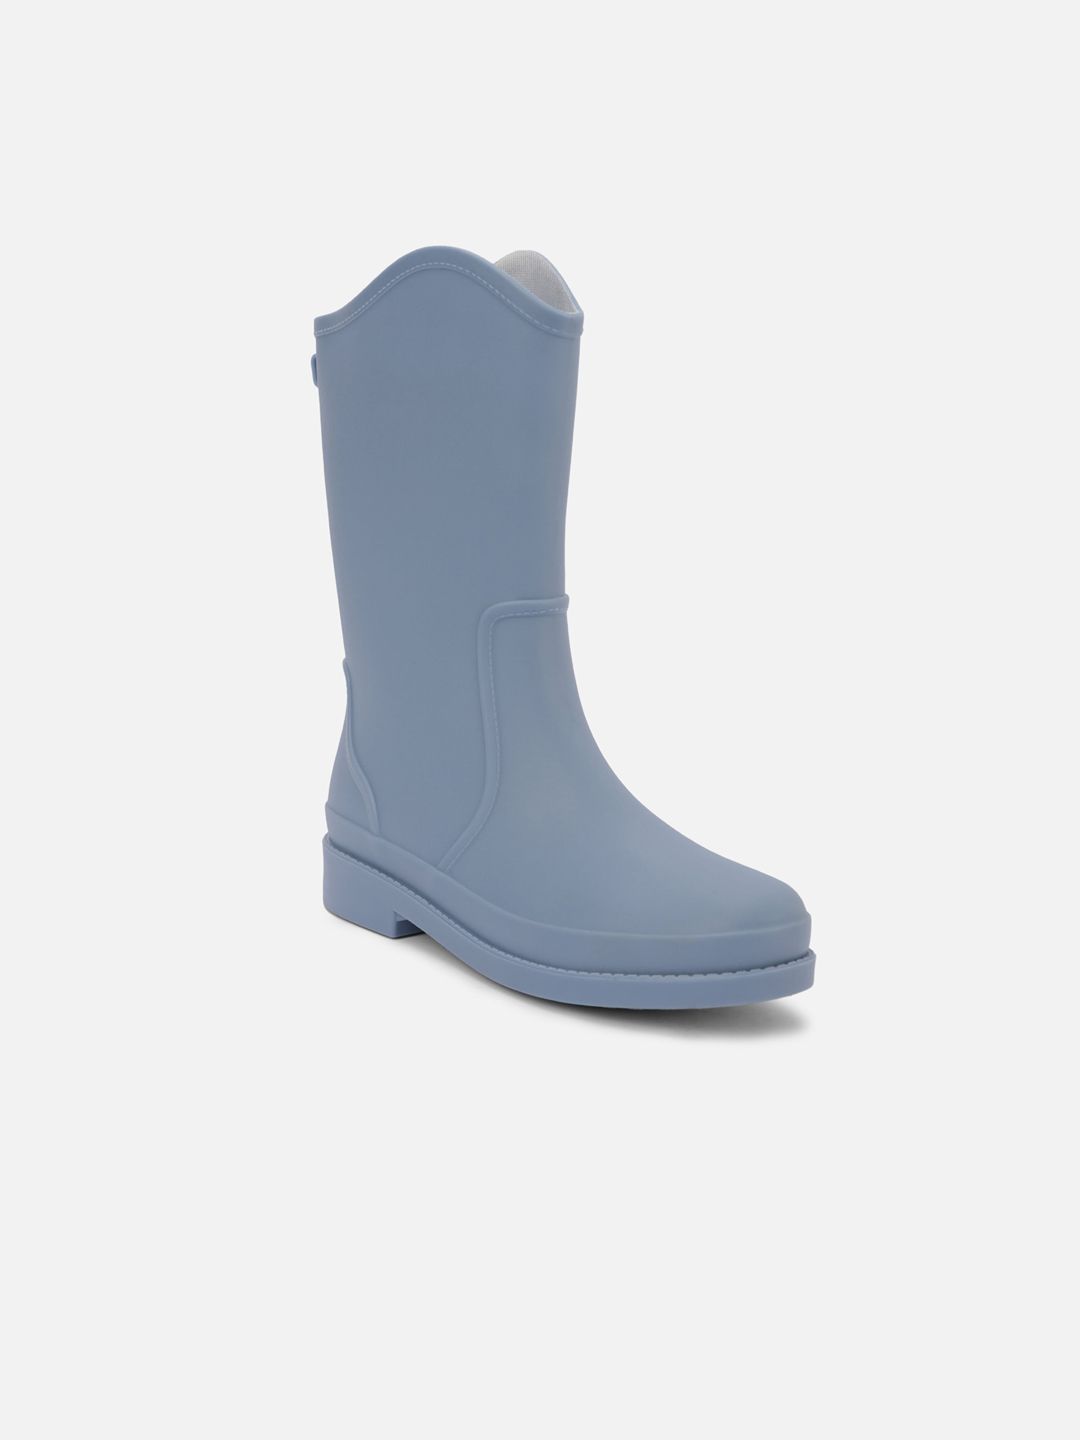 20Dresses Women Blue Mid Calf Length Rain Boots Price in India